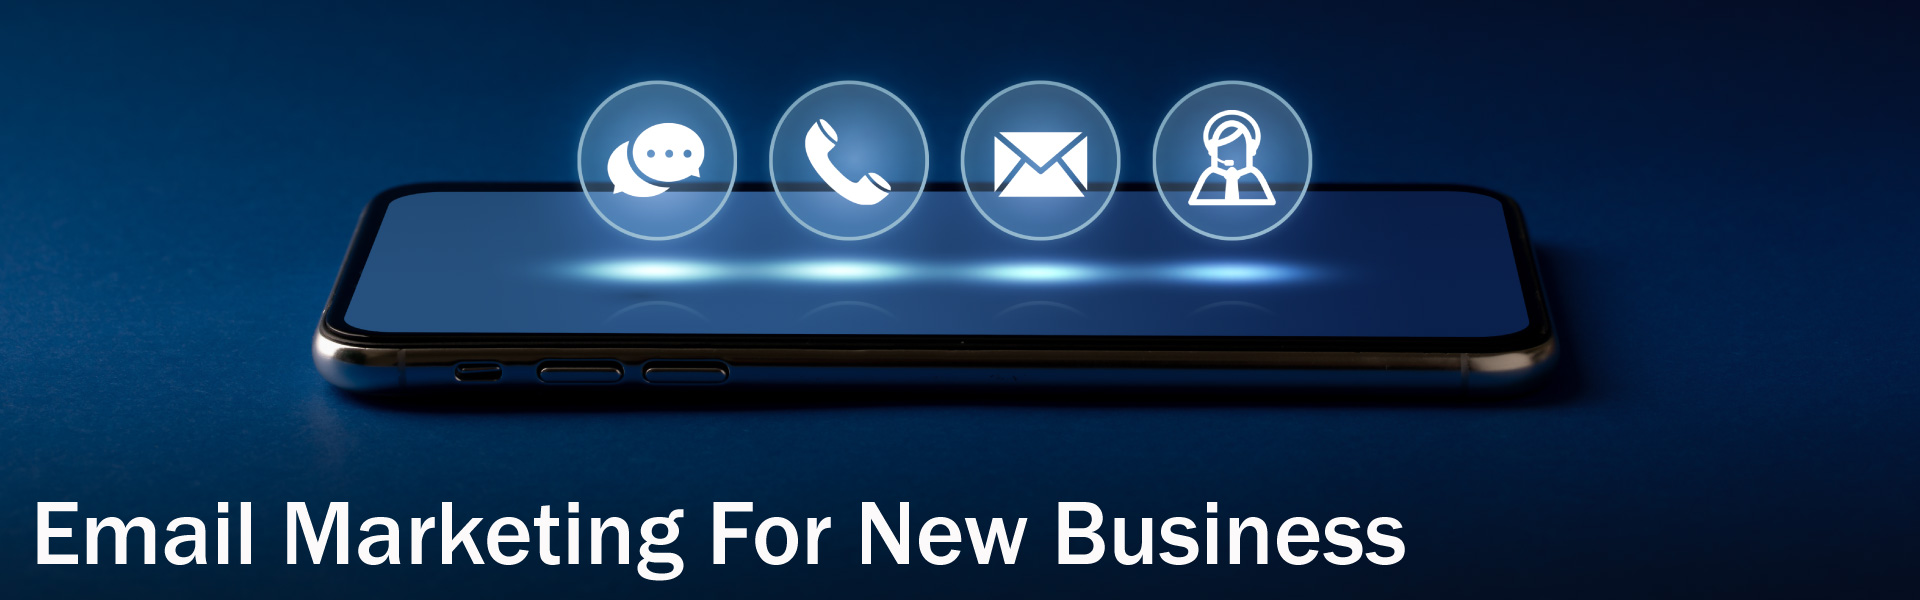 Email Marketing For New Business